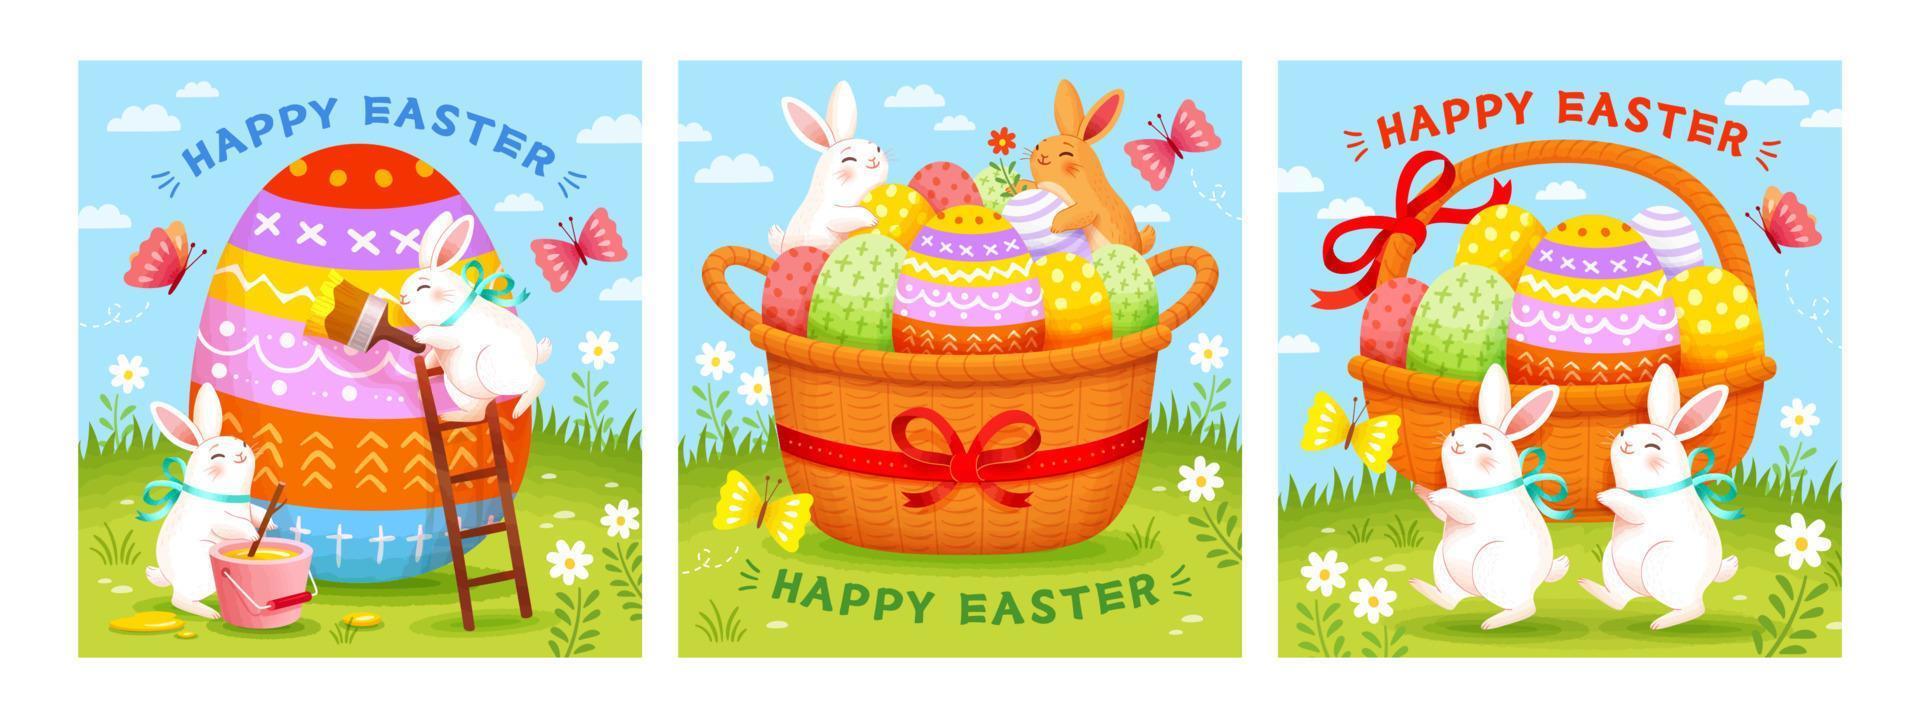 Easter templates with cute rabbits decorating eggs and putting them in baskets. Holiday background suitable for event invitation or greeting card. vector